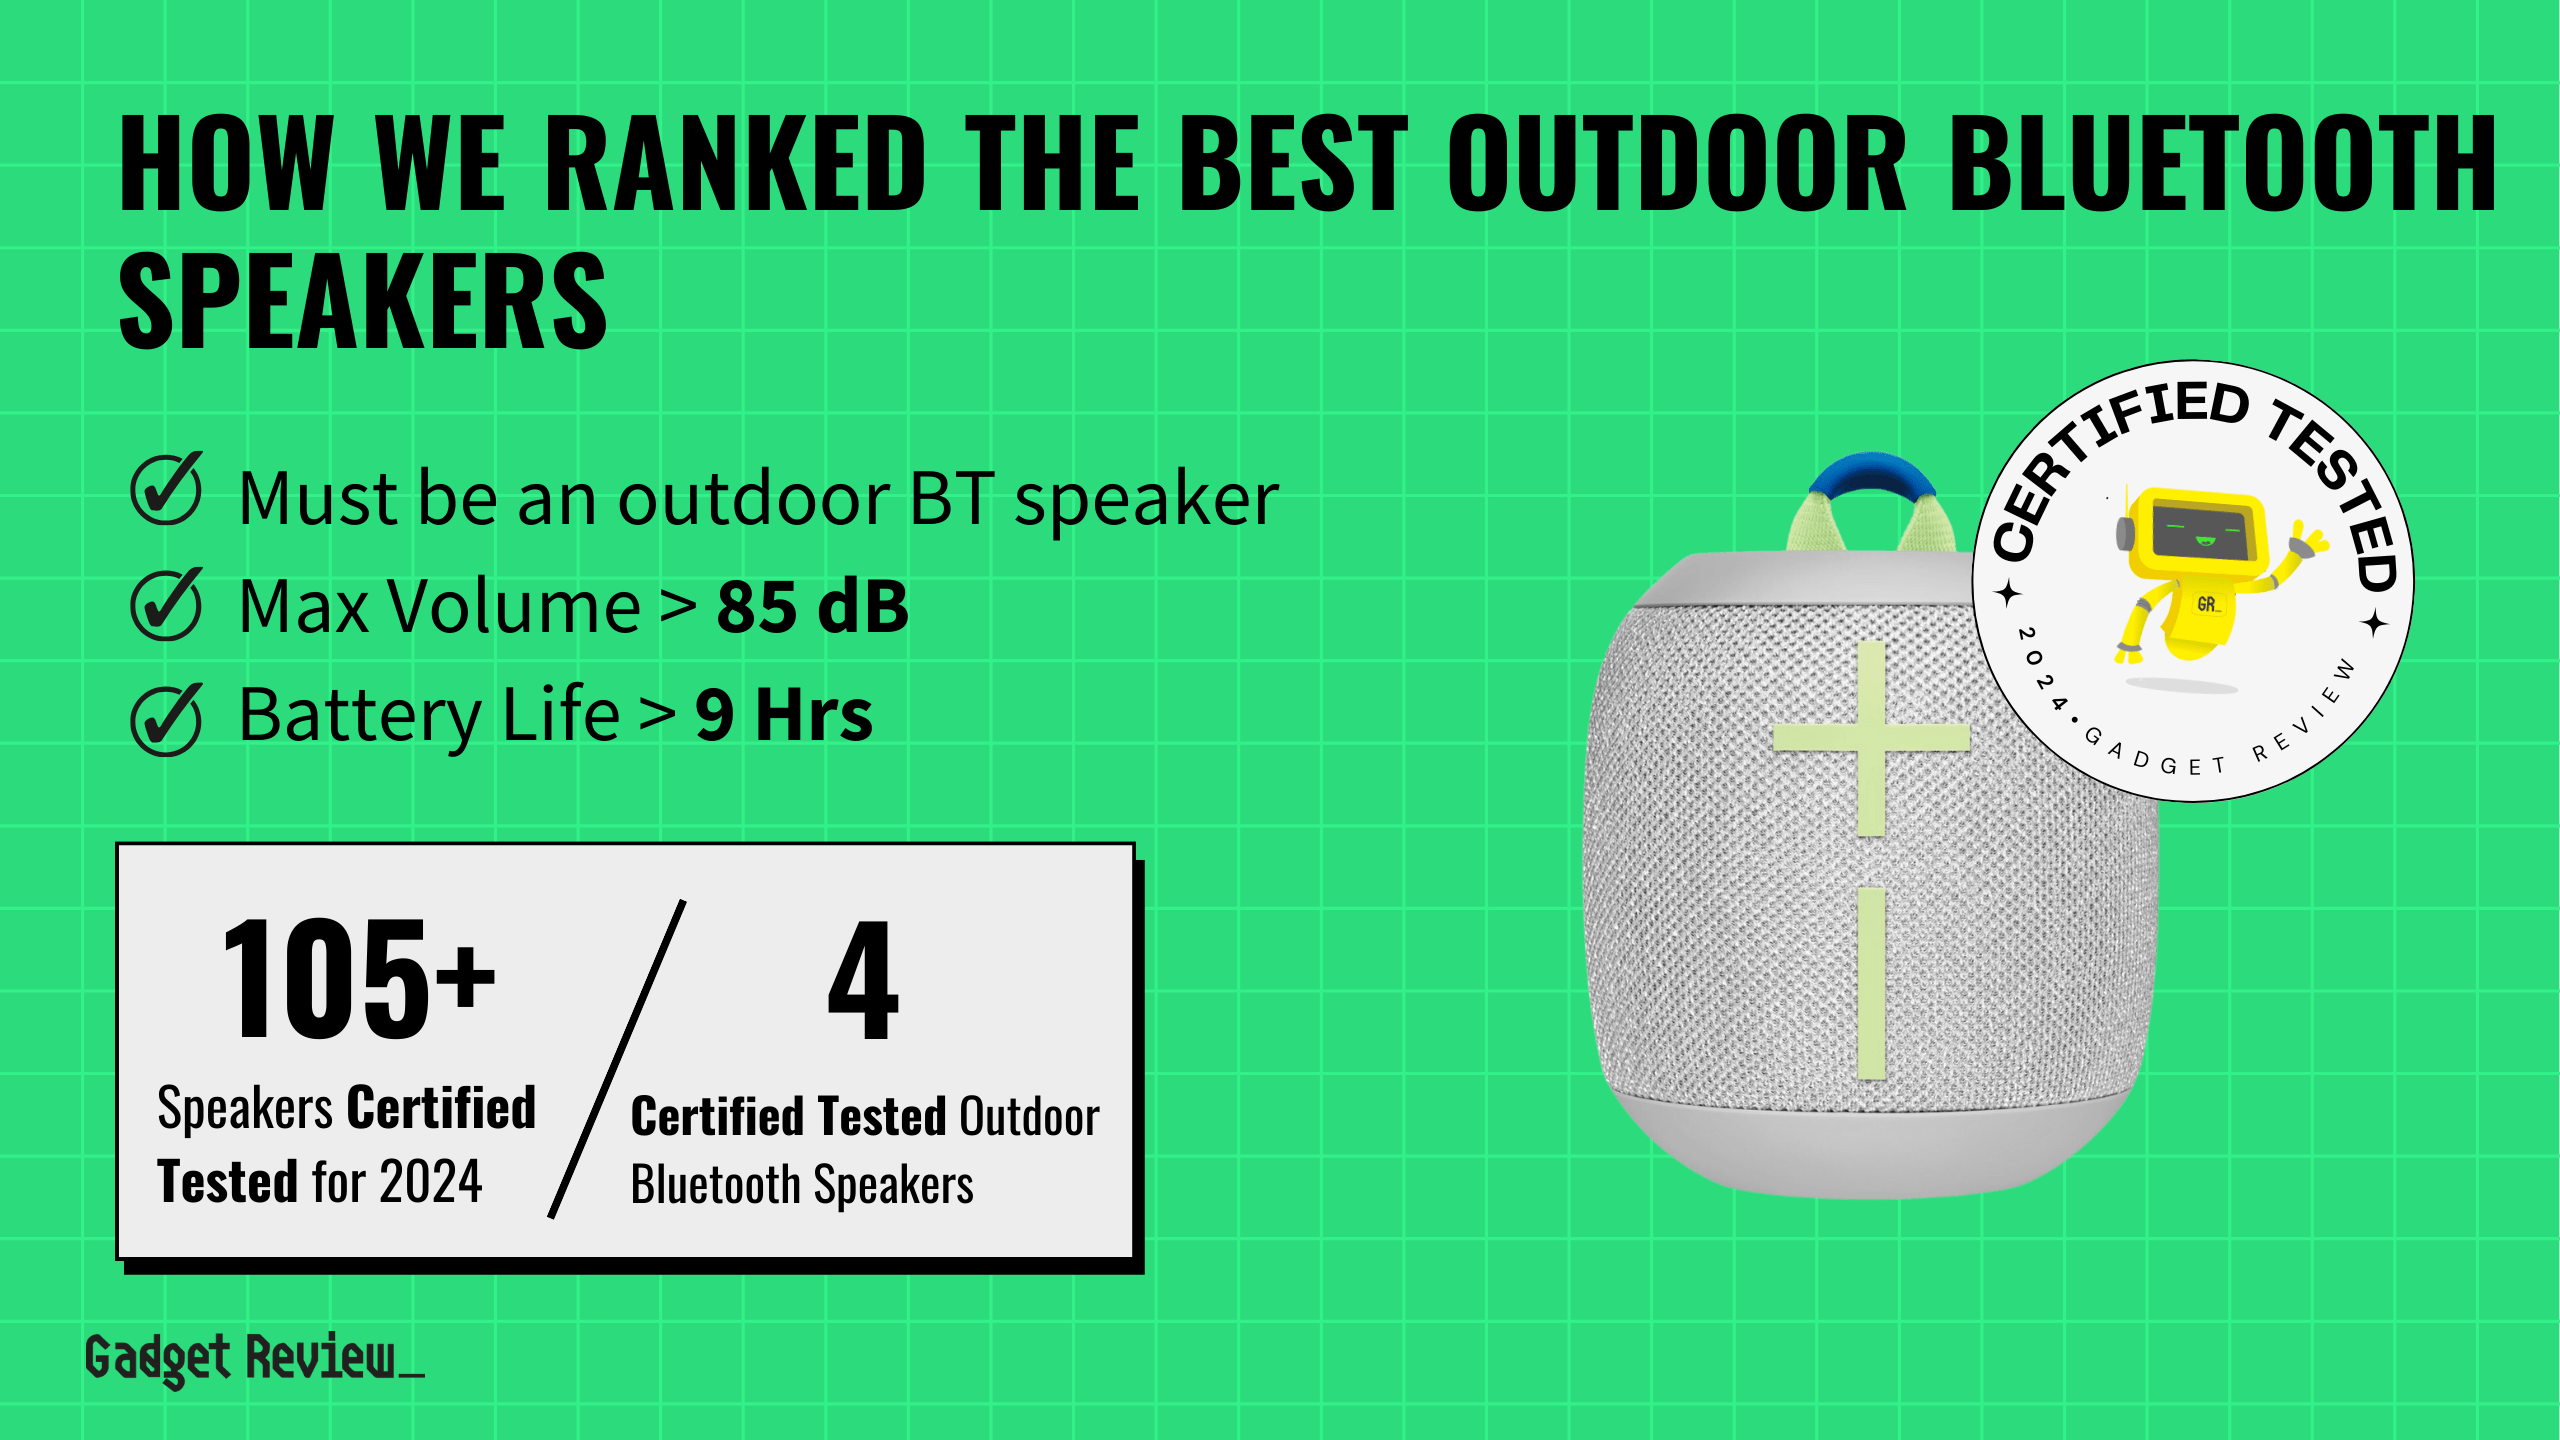 best outdoor bluetooth speakers guide that shows the top best bluetooth speaker model